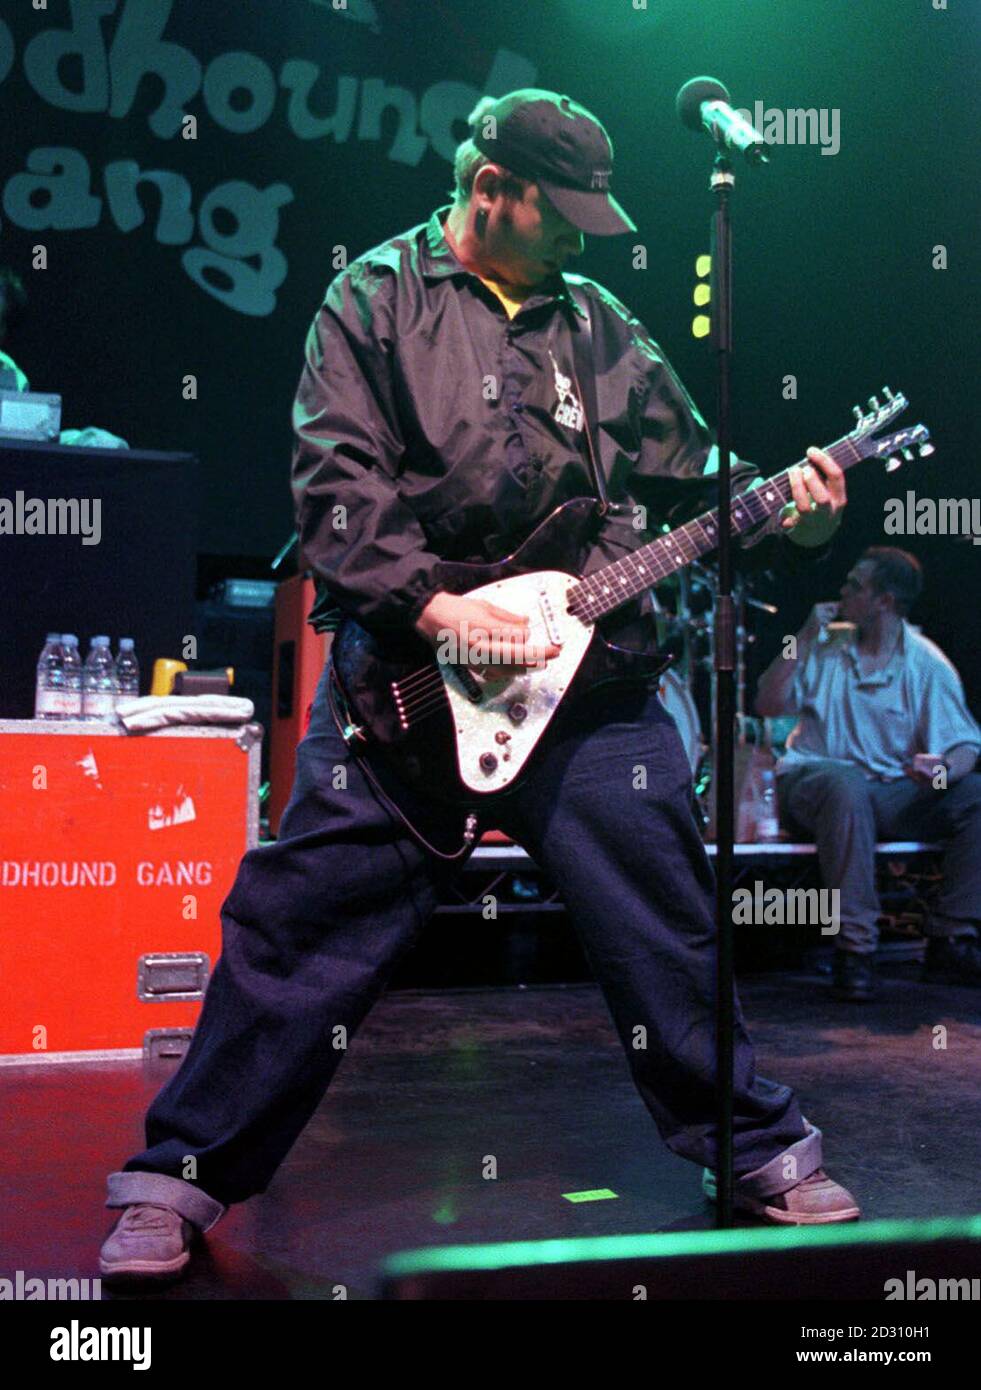 Singer Jimmy Pop Ali of American hip-hop rock band the Bloodhound Gang,  strikes a pose with his guitar on stage at the Astoria, London Stock Photo  - Alamy